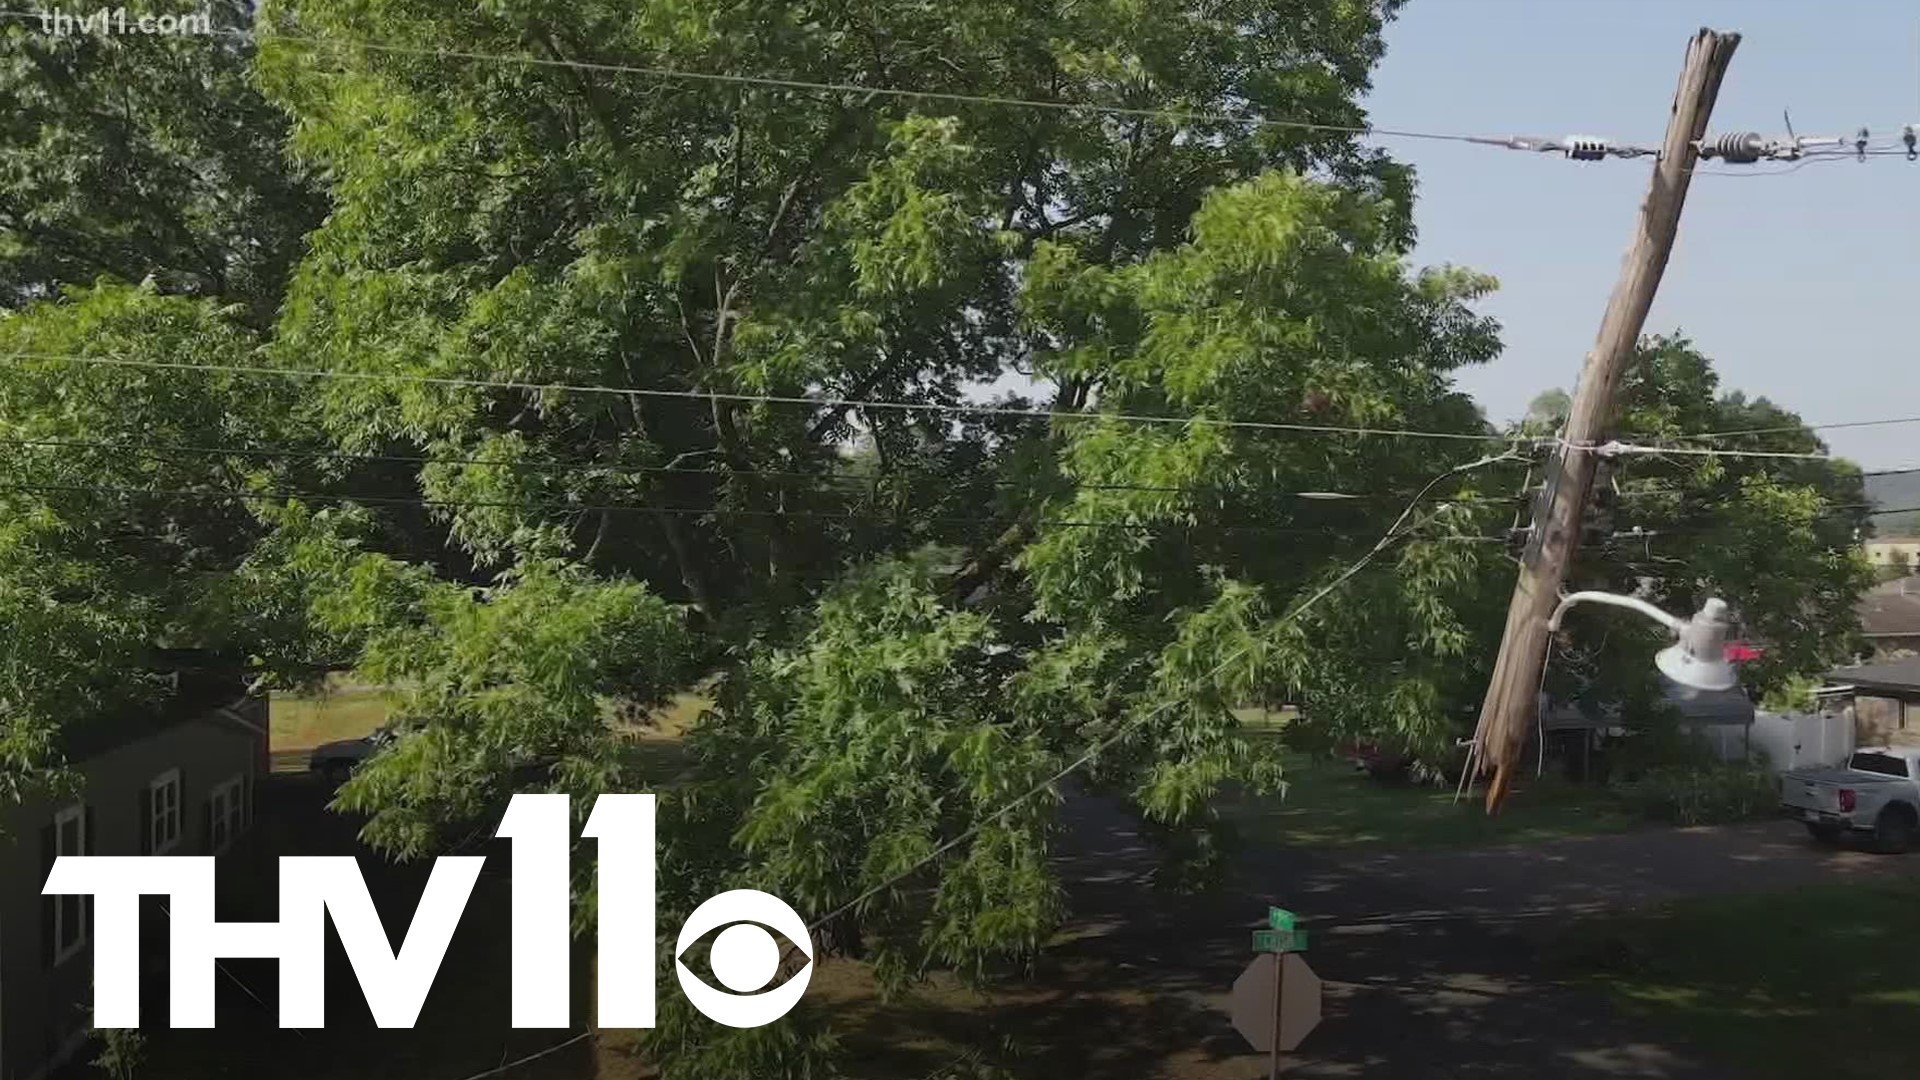 Strong storms across the River Valley knocked down trees and powerlines all over Paris, Arkansas. The outage has also impacted the city's water treatment plant.